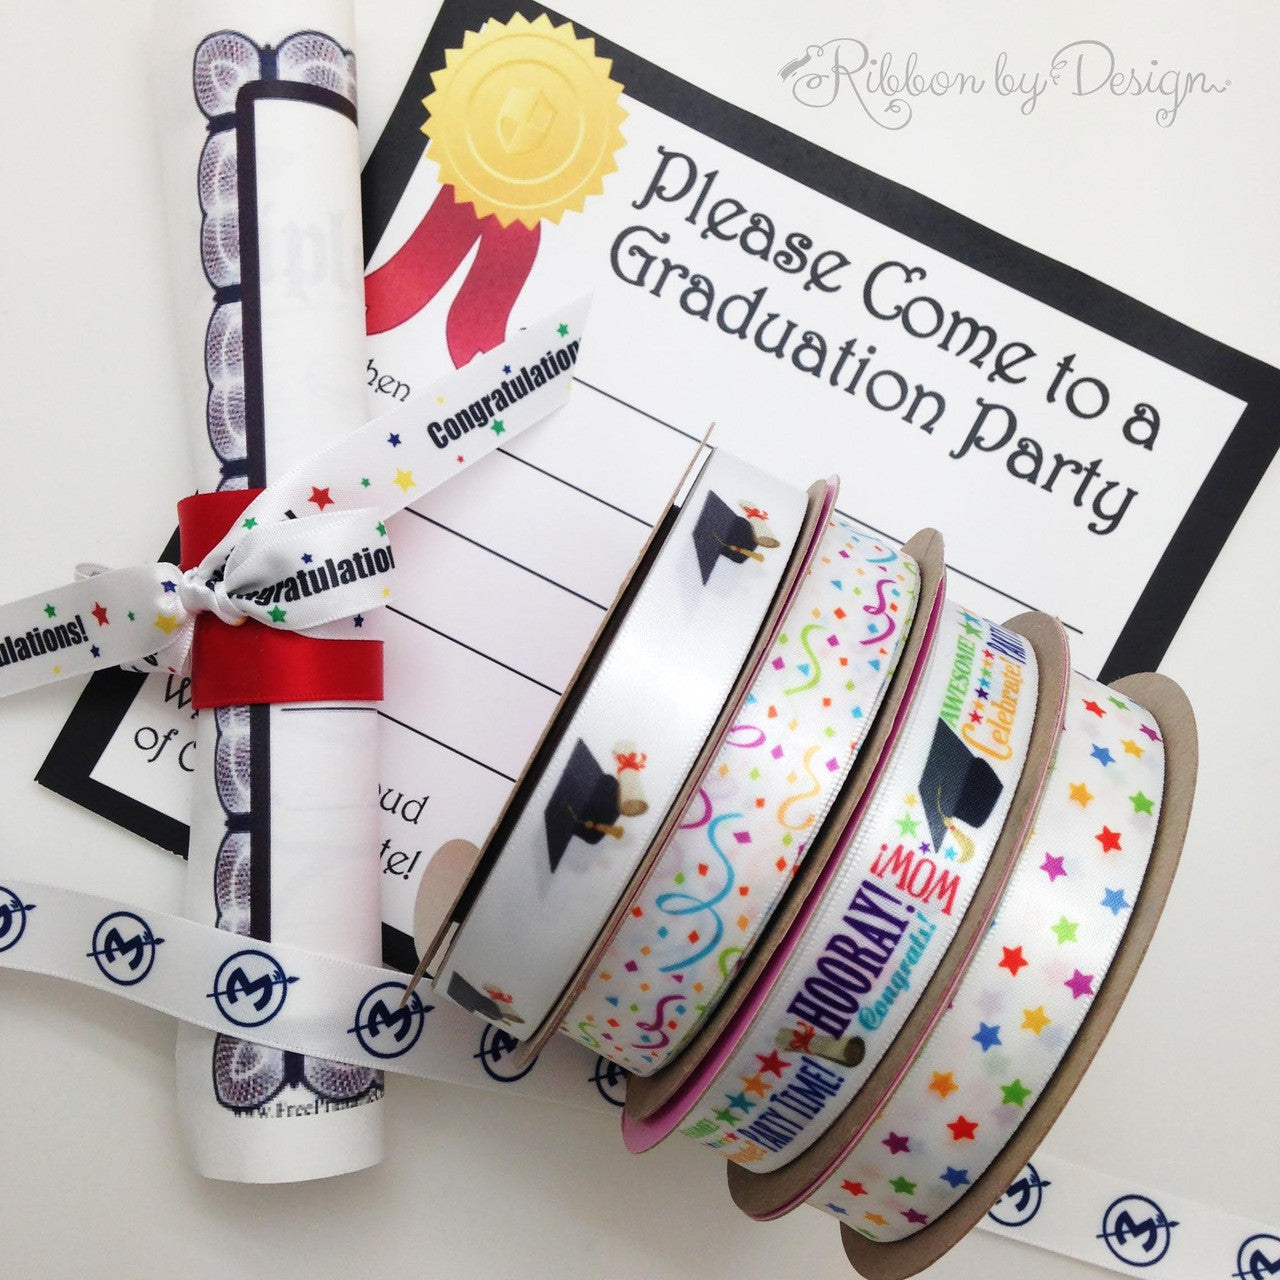 We have a wide variety of great ribbons to make your graduation party really pop! Choose from grad word block, grad hats, streamers and stars!